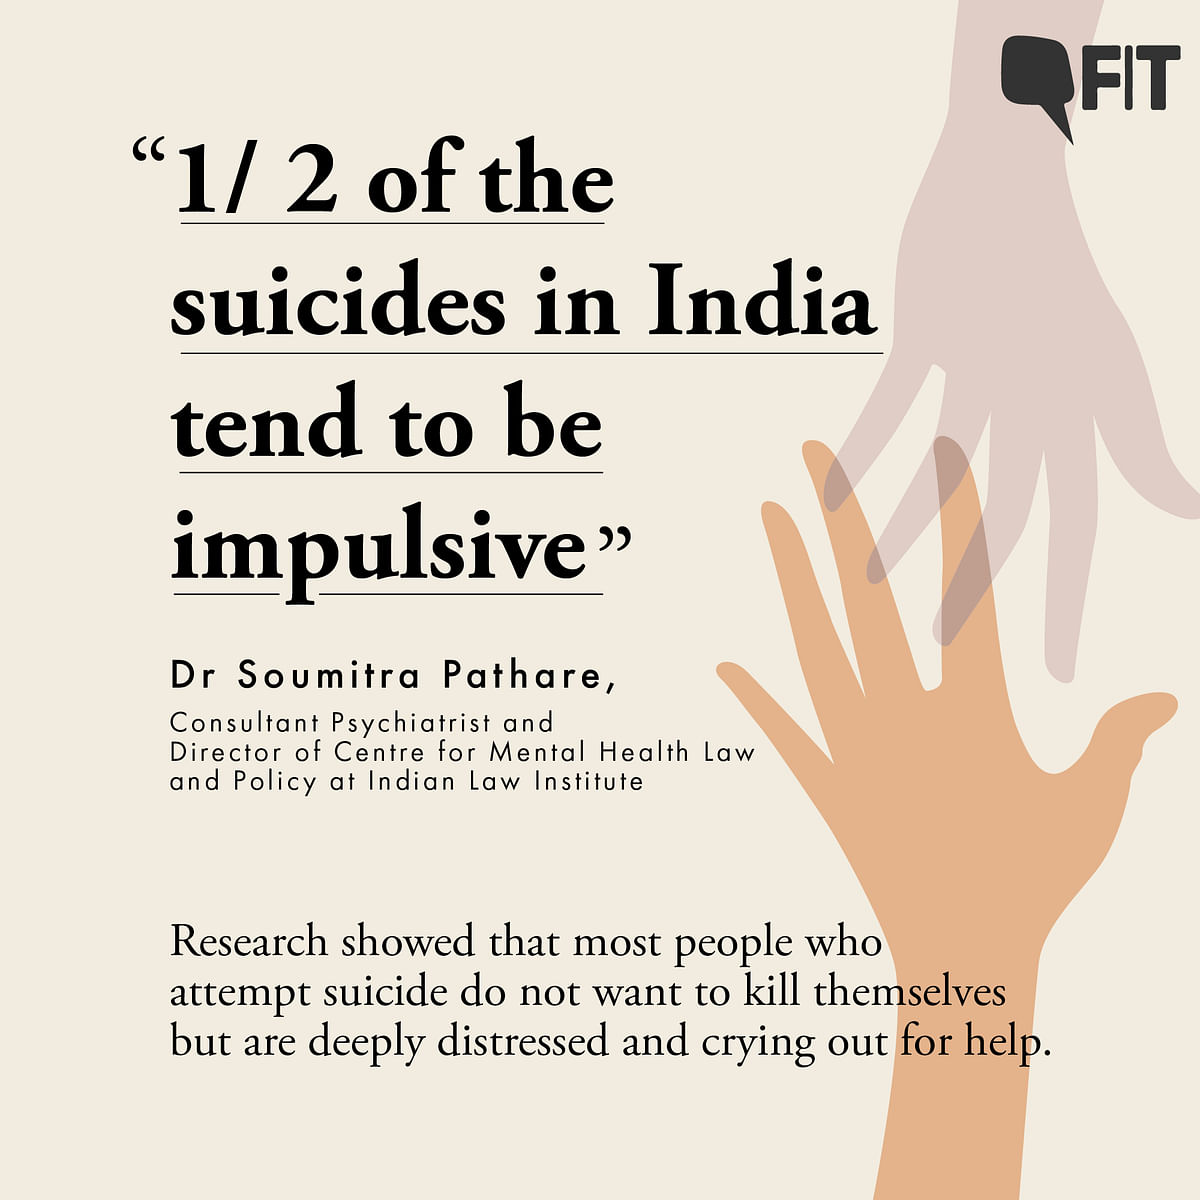  1 in 3 suicides that happen in the world, happen in our country. But suicide is preventable, here’s how.